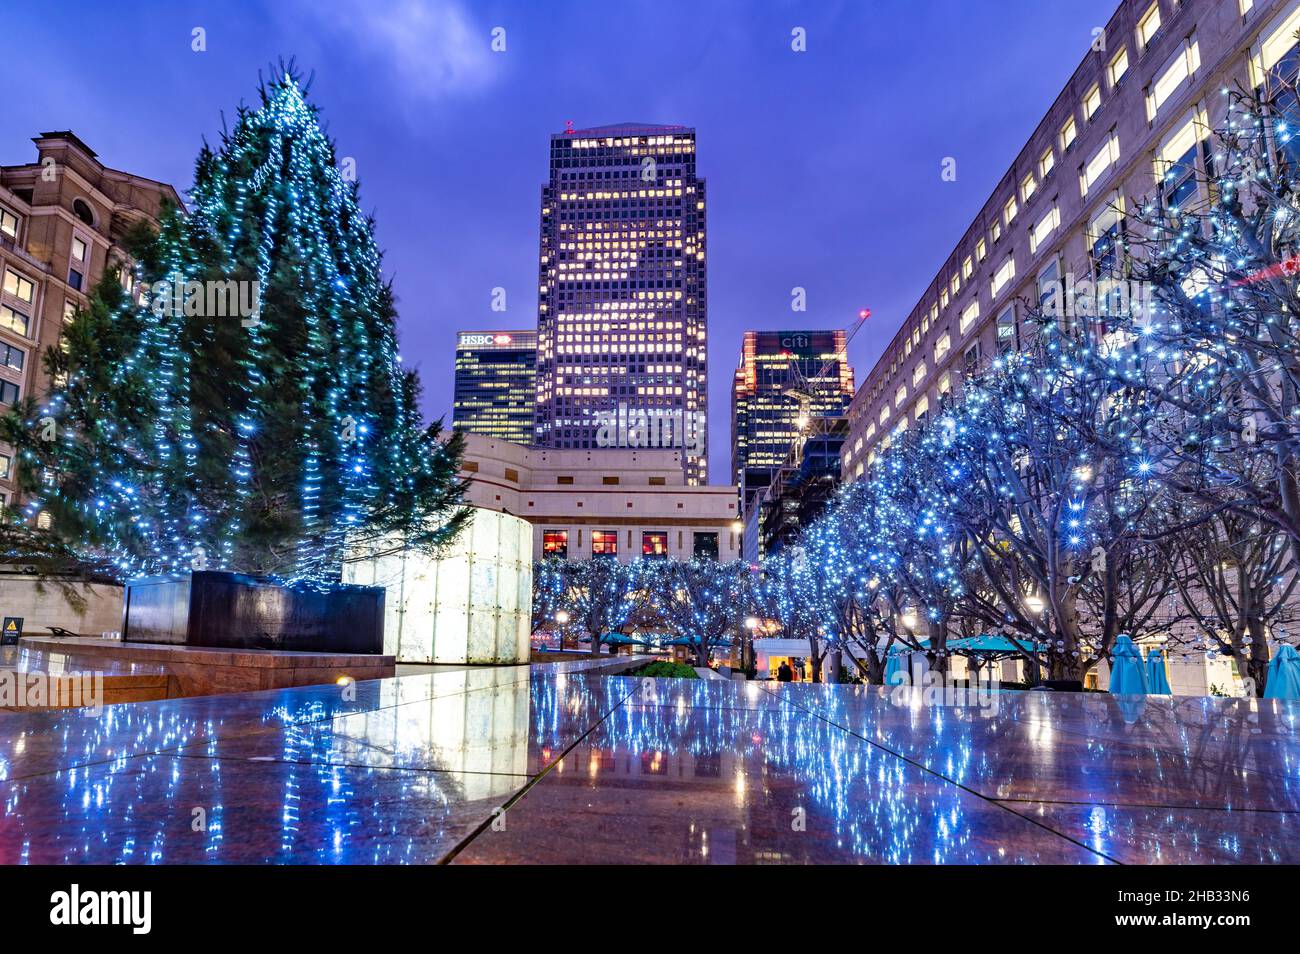 London, England, UK - December 15, 2021: Wide view of the Cabot and One Canada Square illuminated in evening lights, surrounded by Christmas tree deco Stock Photo